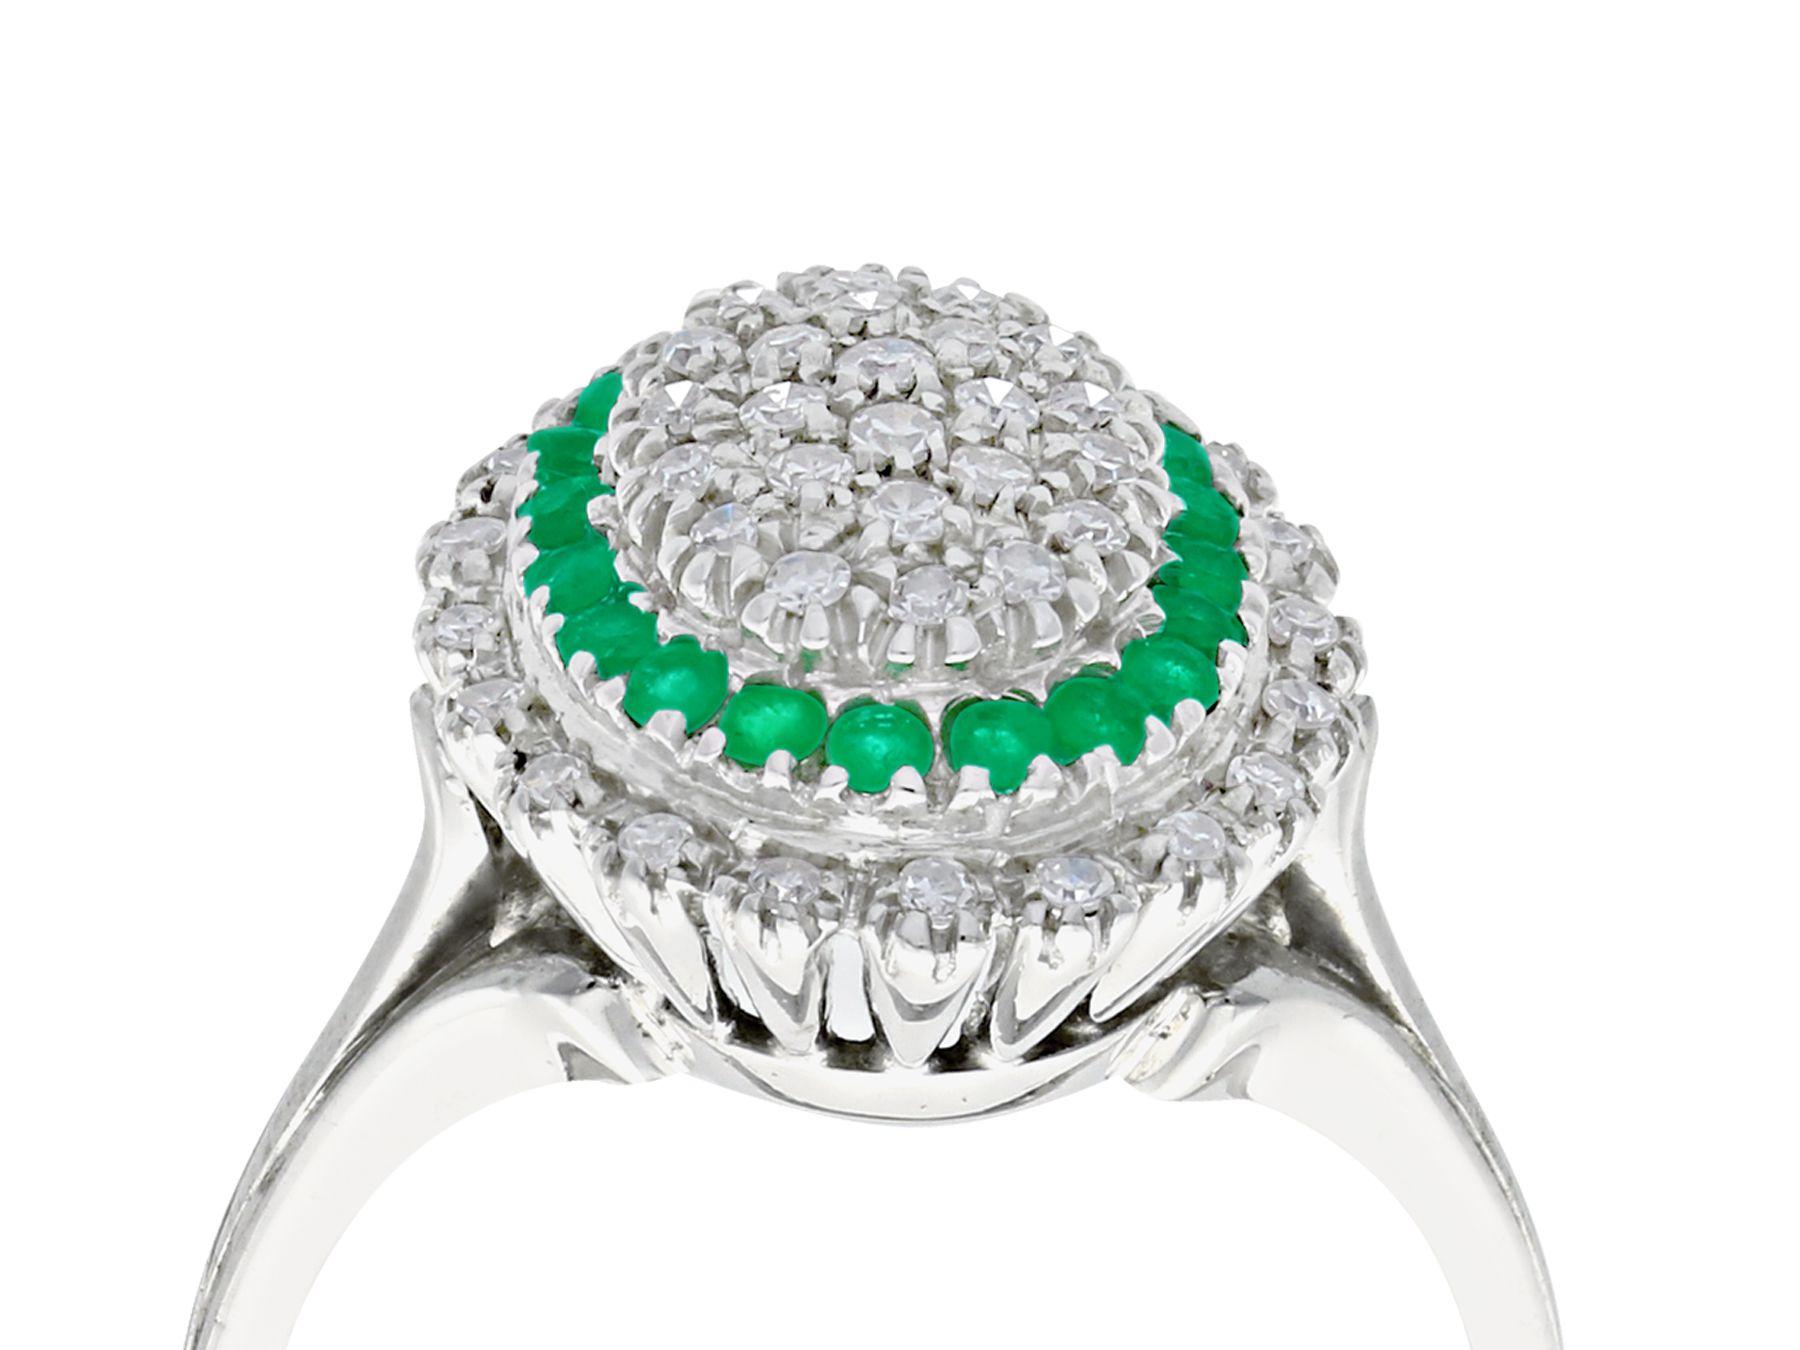 A fine and impressive vintage 0.31 carat natural emerald and 0.72 carat diamond dress ring in 18 karat white gold; part of our diverse range of gemstone jewelry

This impressive pavé set diamond and emerald dress ring has been crafted in 18k white